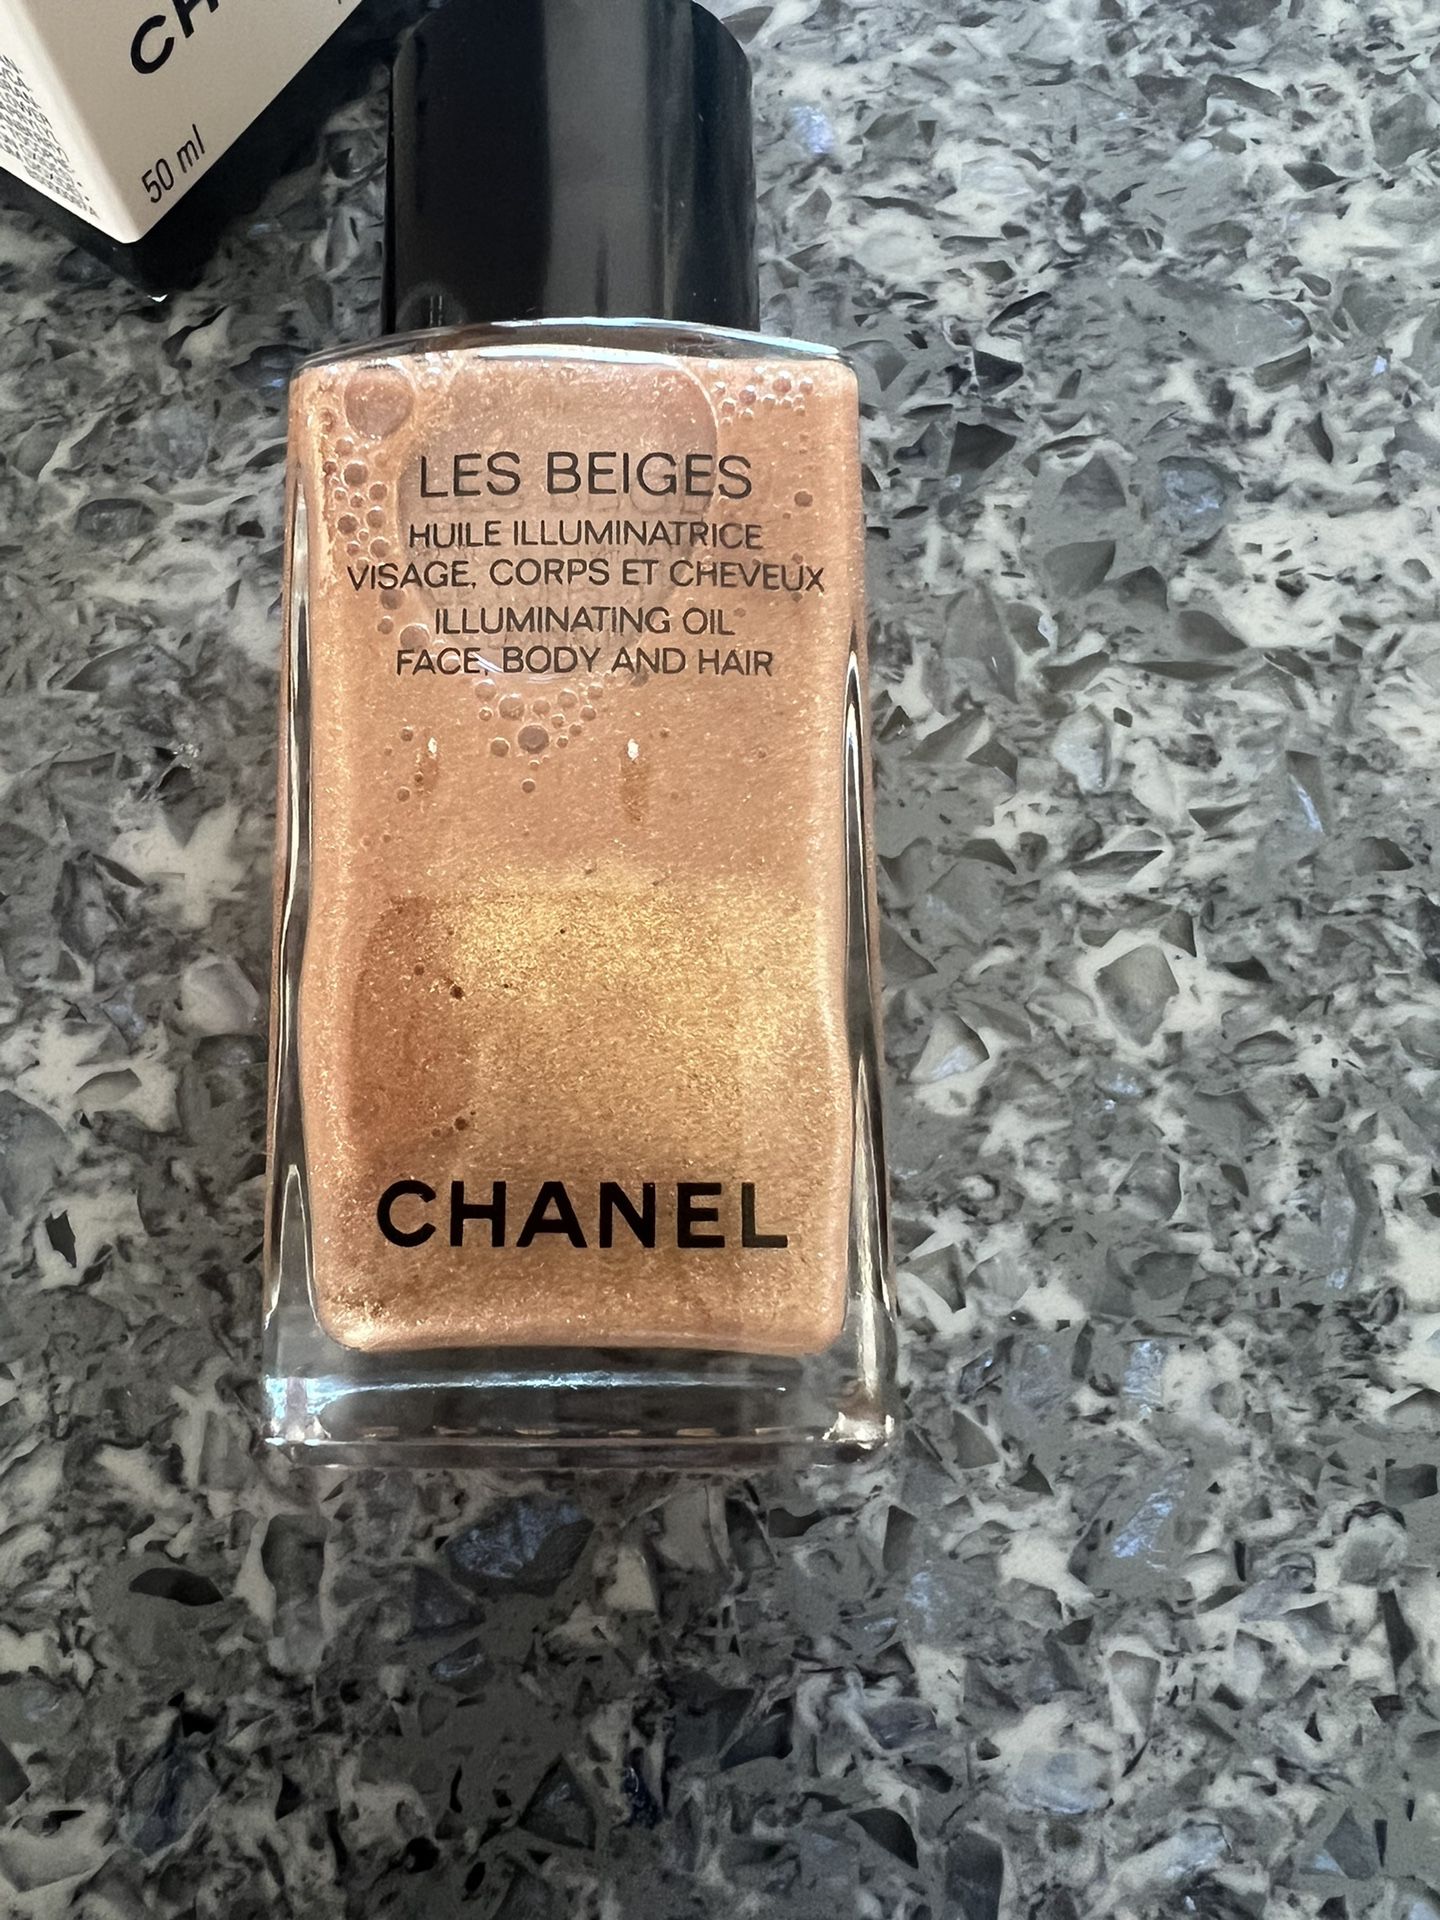 Chanel LES BEIGES Illuminating Oil Face, Body and Hair